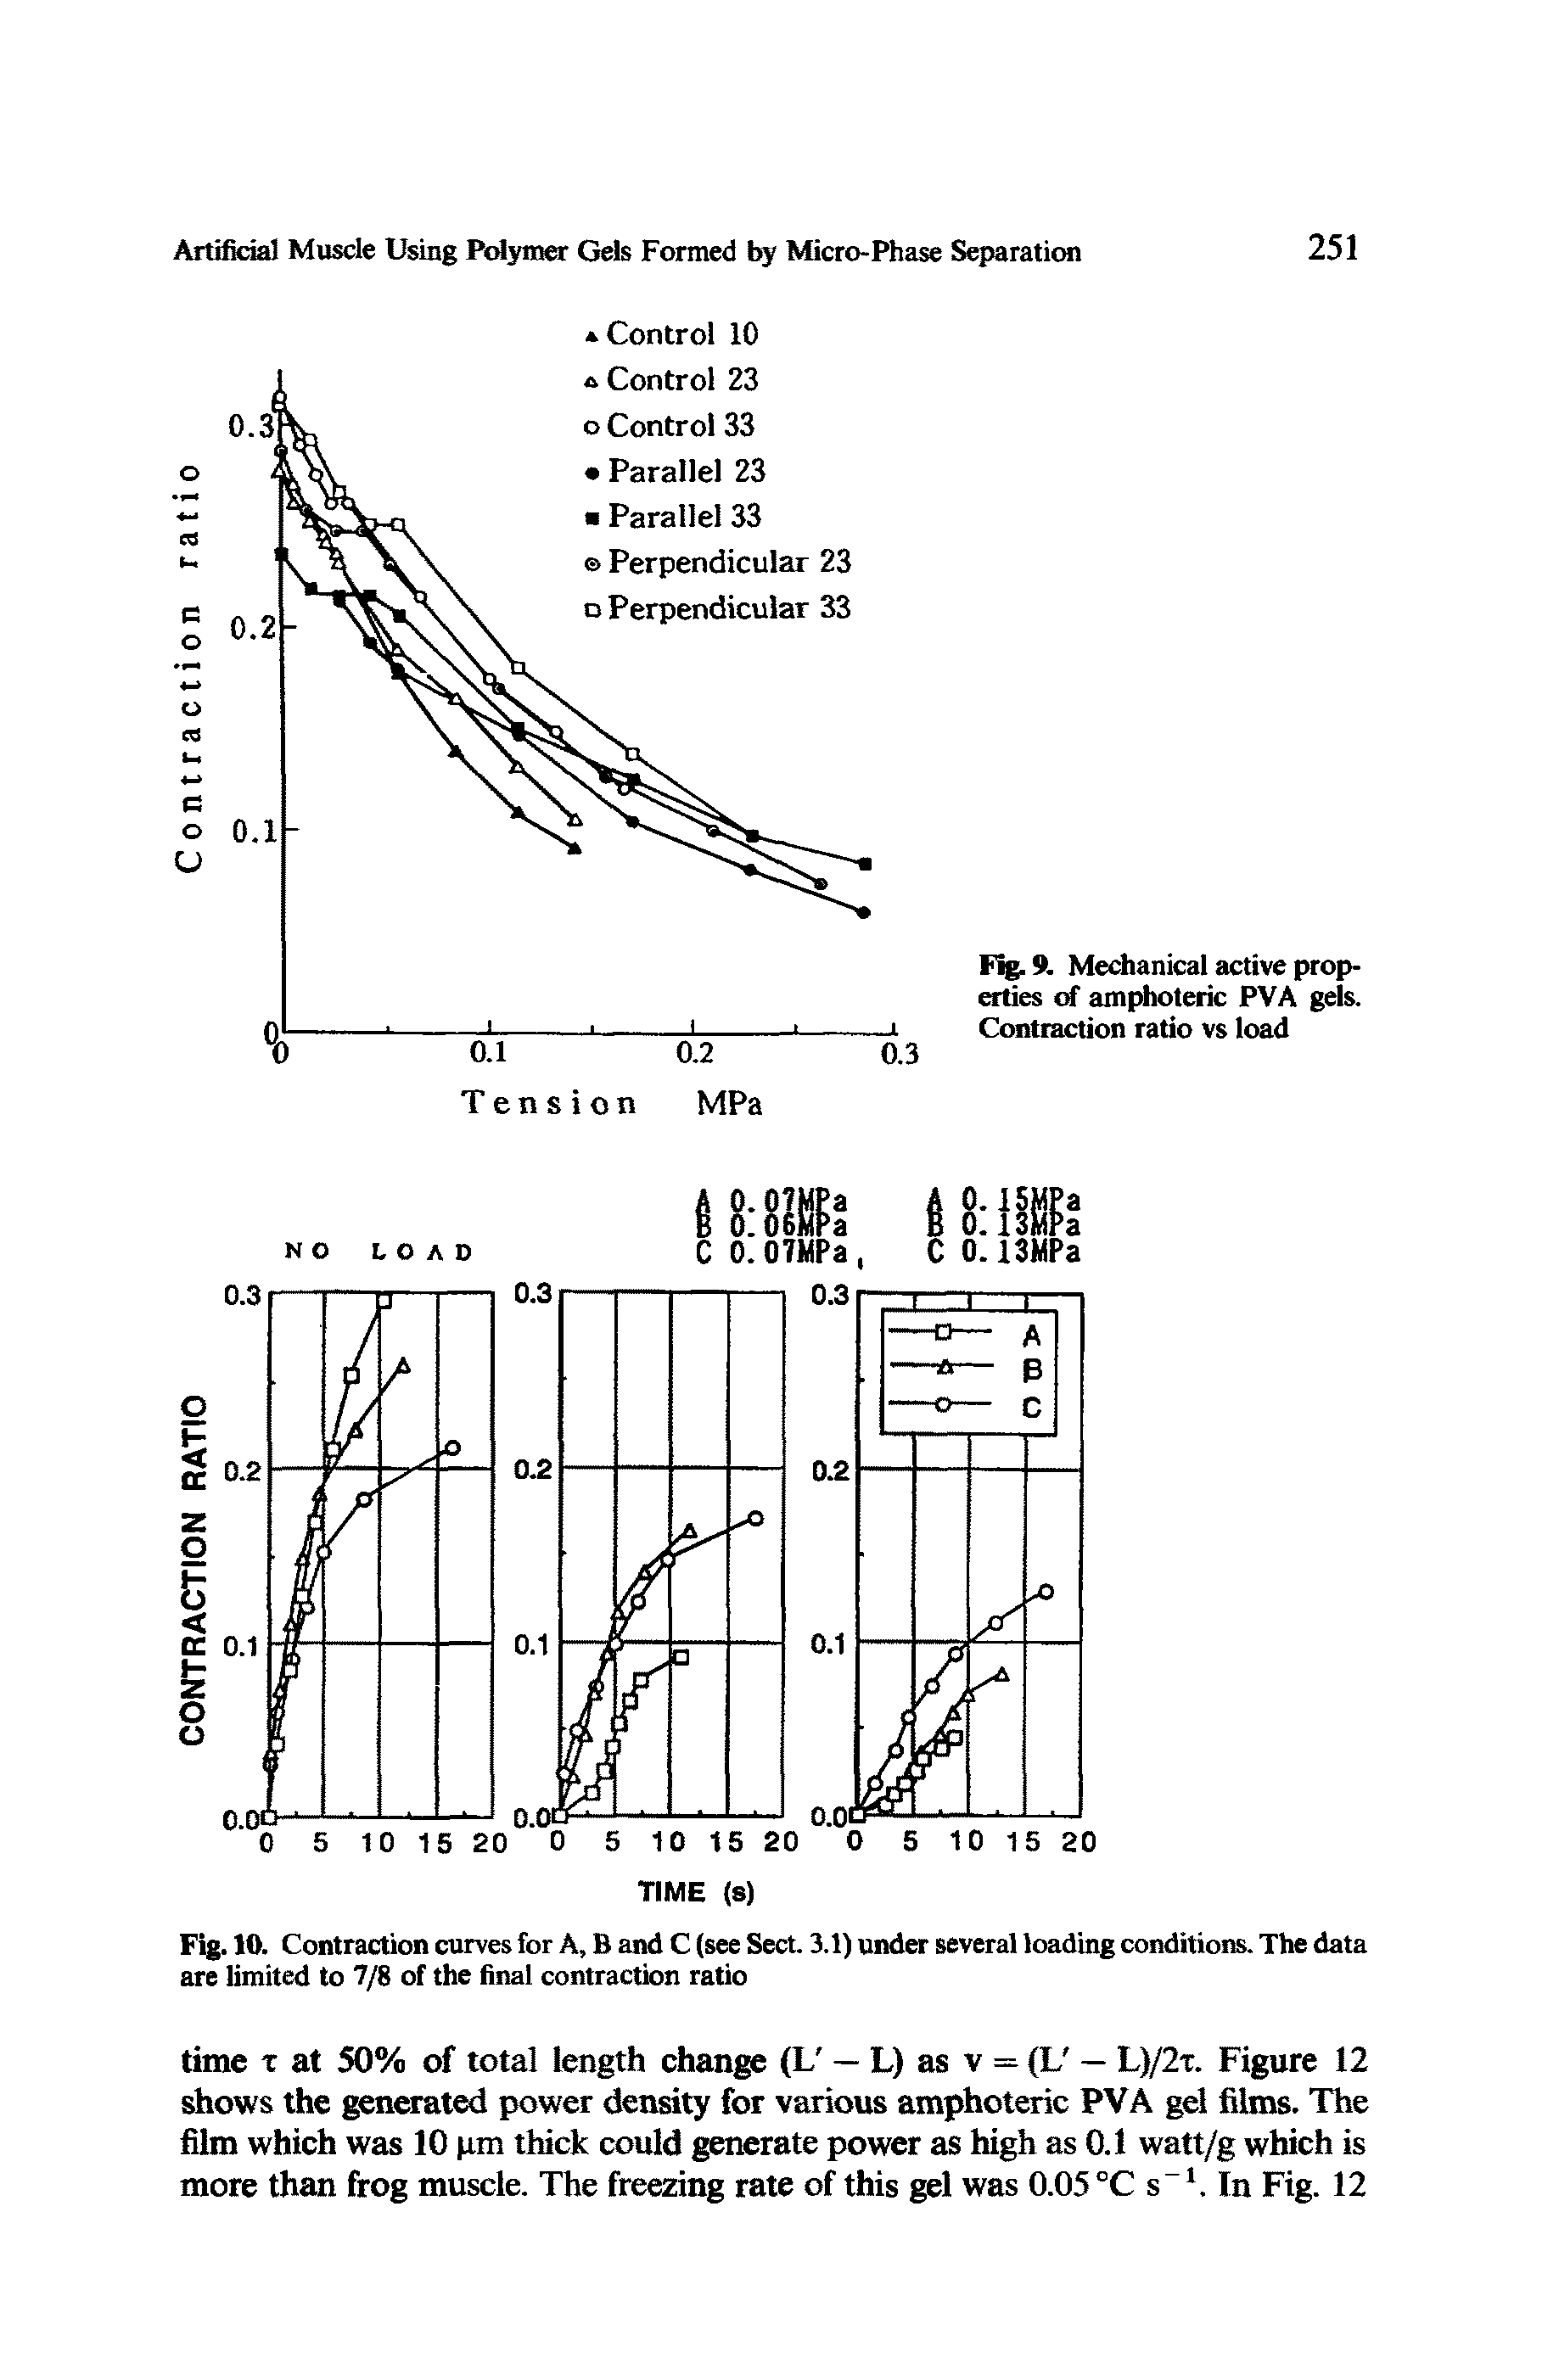 Fig. 10. Contraction curves for A, B and C (see Sect. 3.1) under several loading conditions. The data are limited to 7/8 of the final contraction ratio...